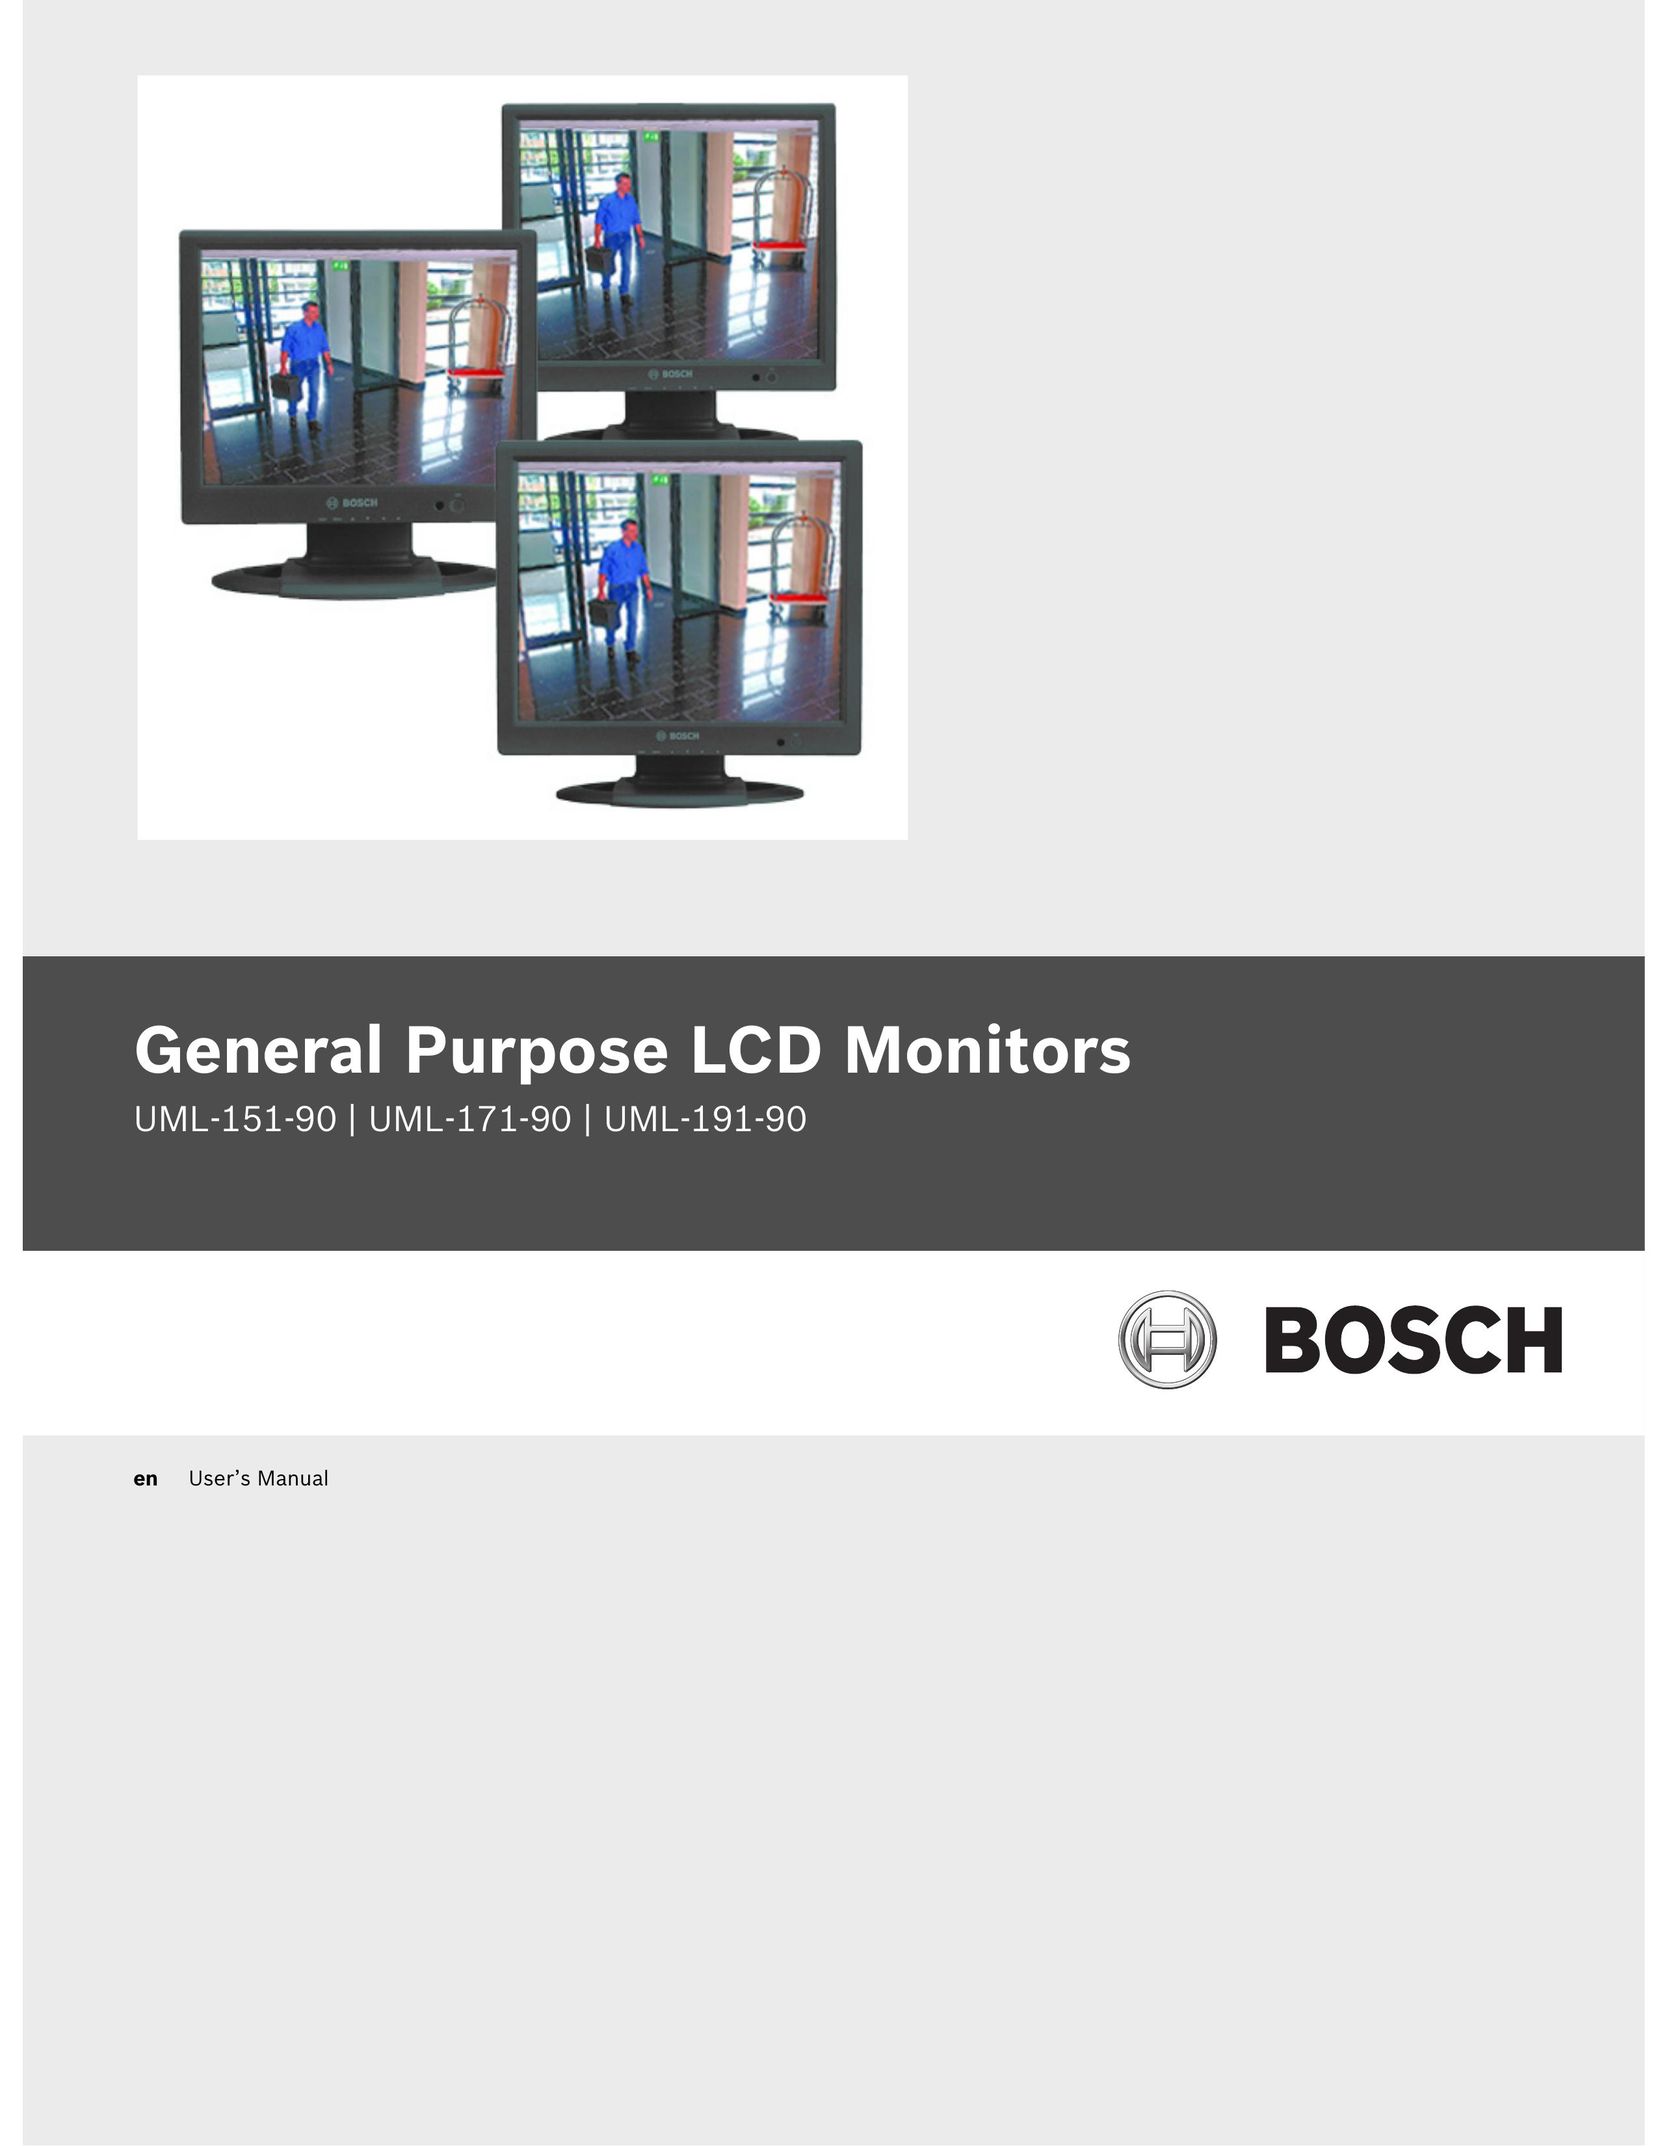 Bosch Appliances UML-171-90 Computer Monitor User Manual (Page 1)